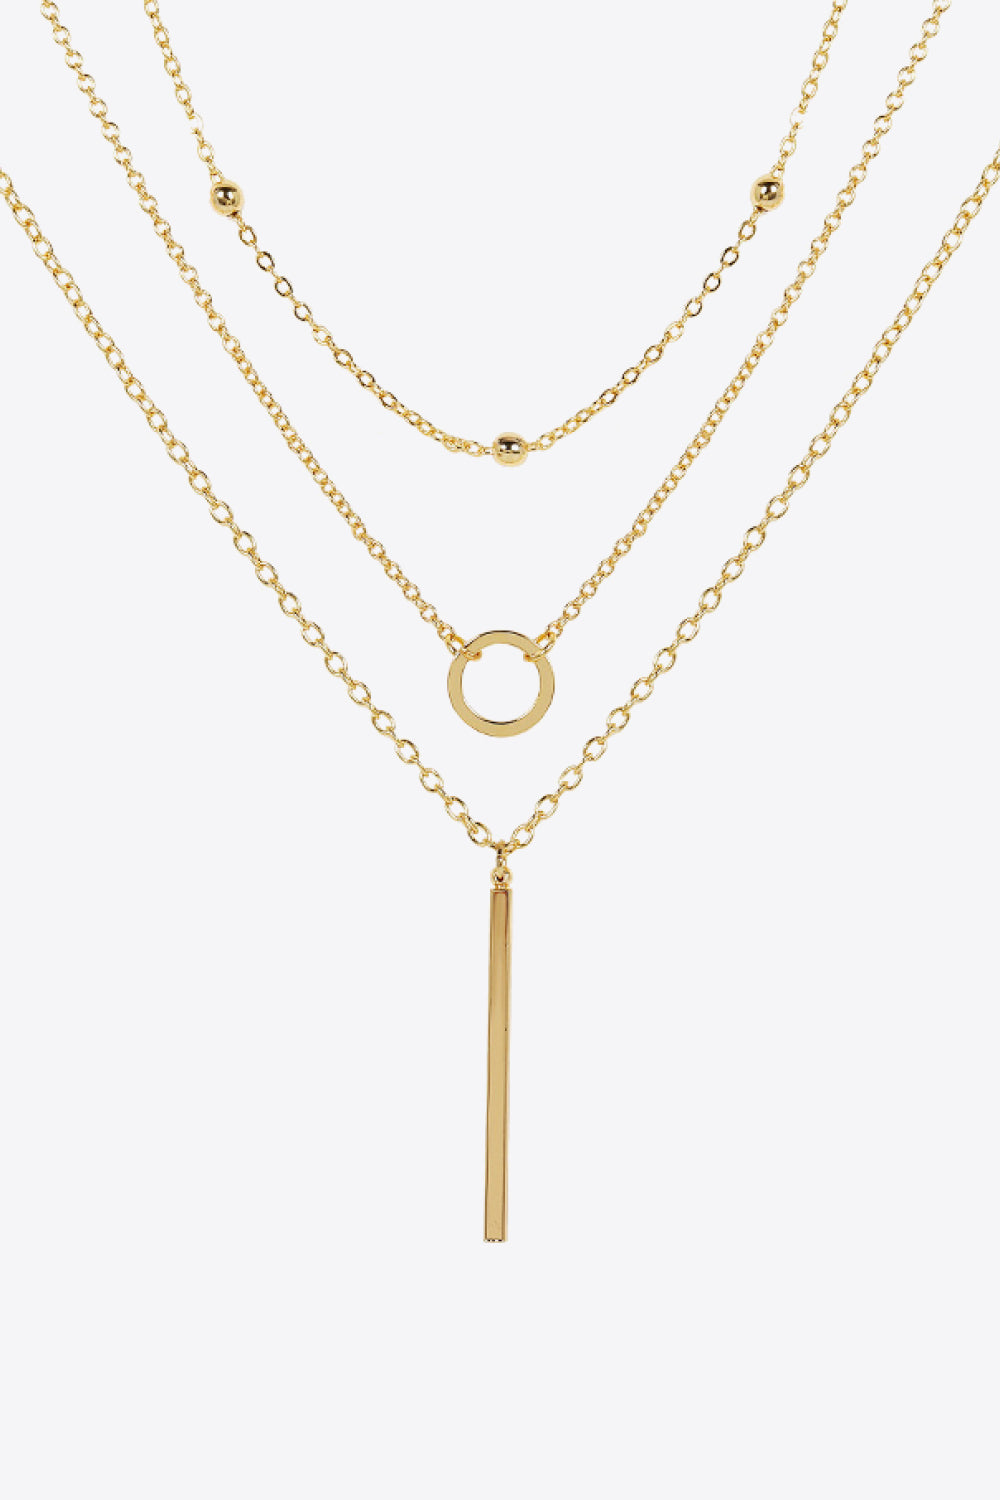 Basic Three-Piece Chain Necklace Set - The Downtown Dachshund